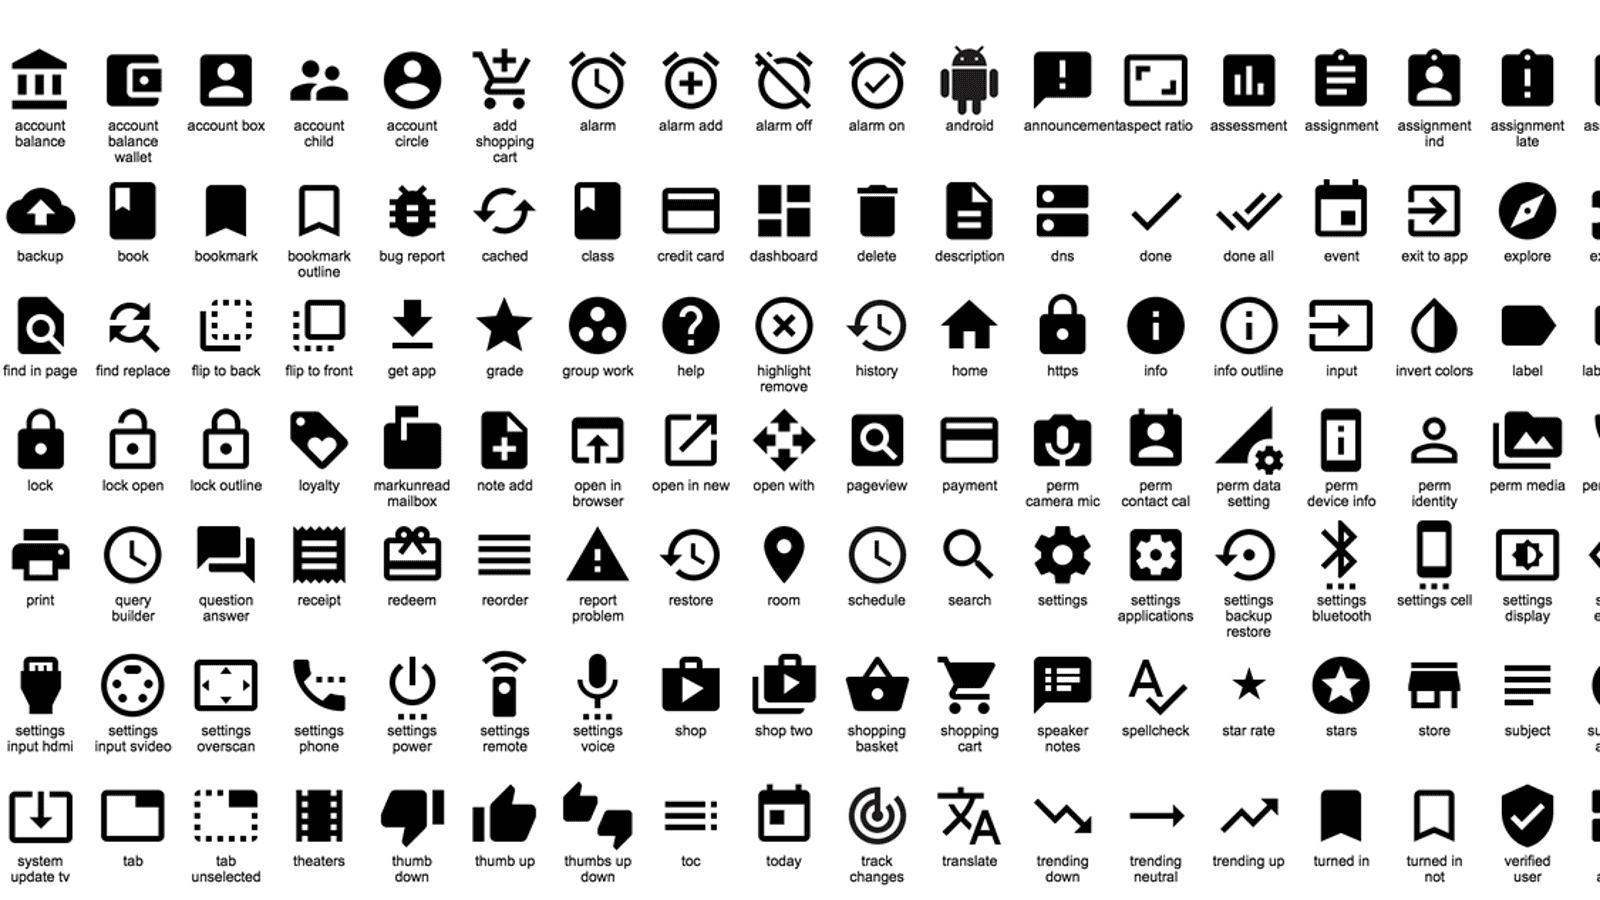 cool icons